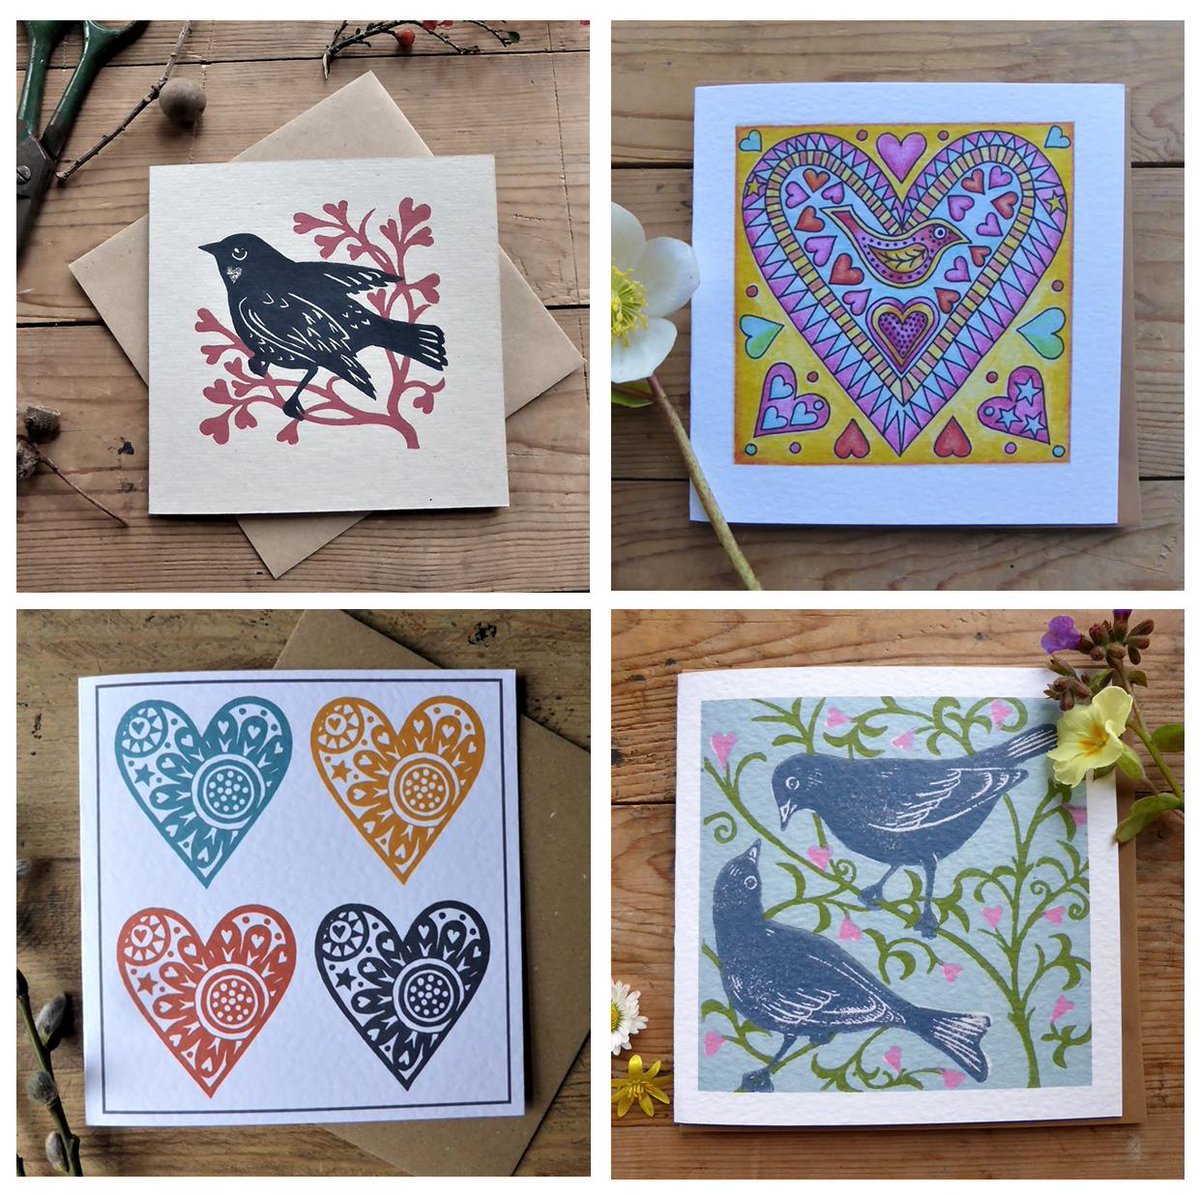 Are you loookng for a card for your Valentine? I've lots of designs to fit the occasion 💕#valentinecards #onlinecraft #CraftBizParty #HandmadeInUK 

etsy.com/uk/shop/SarahR…